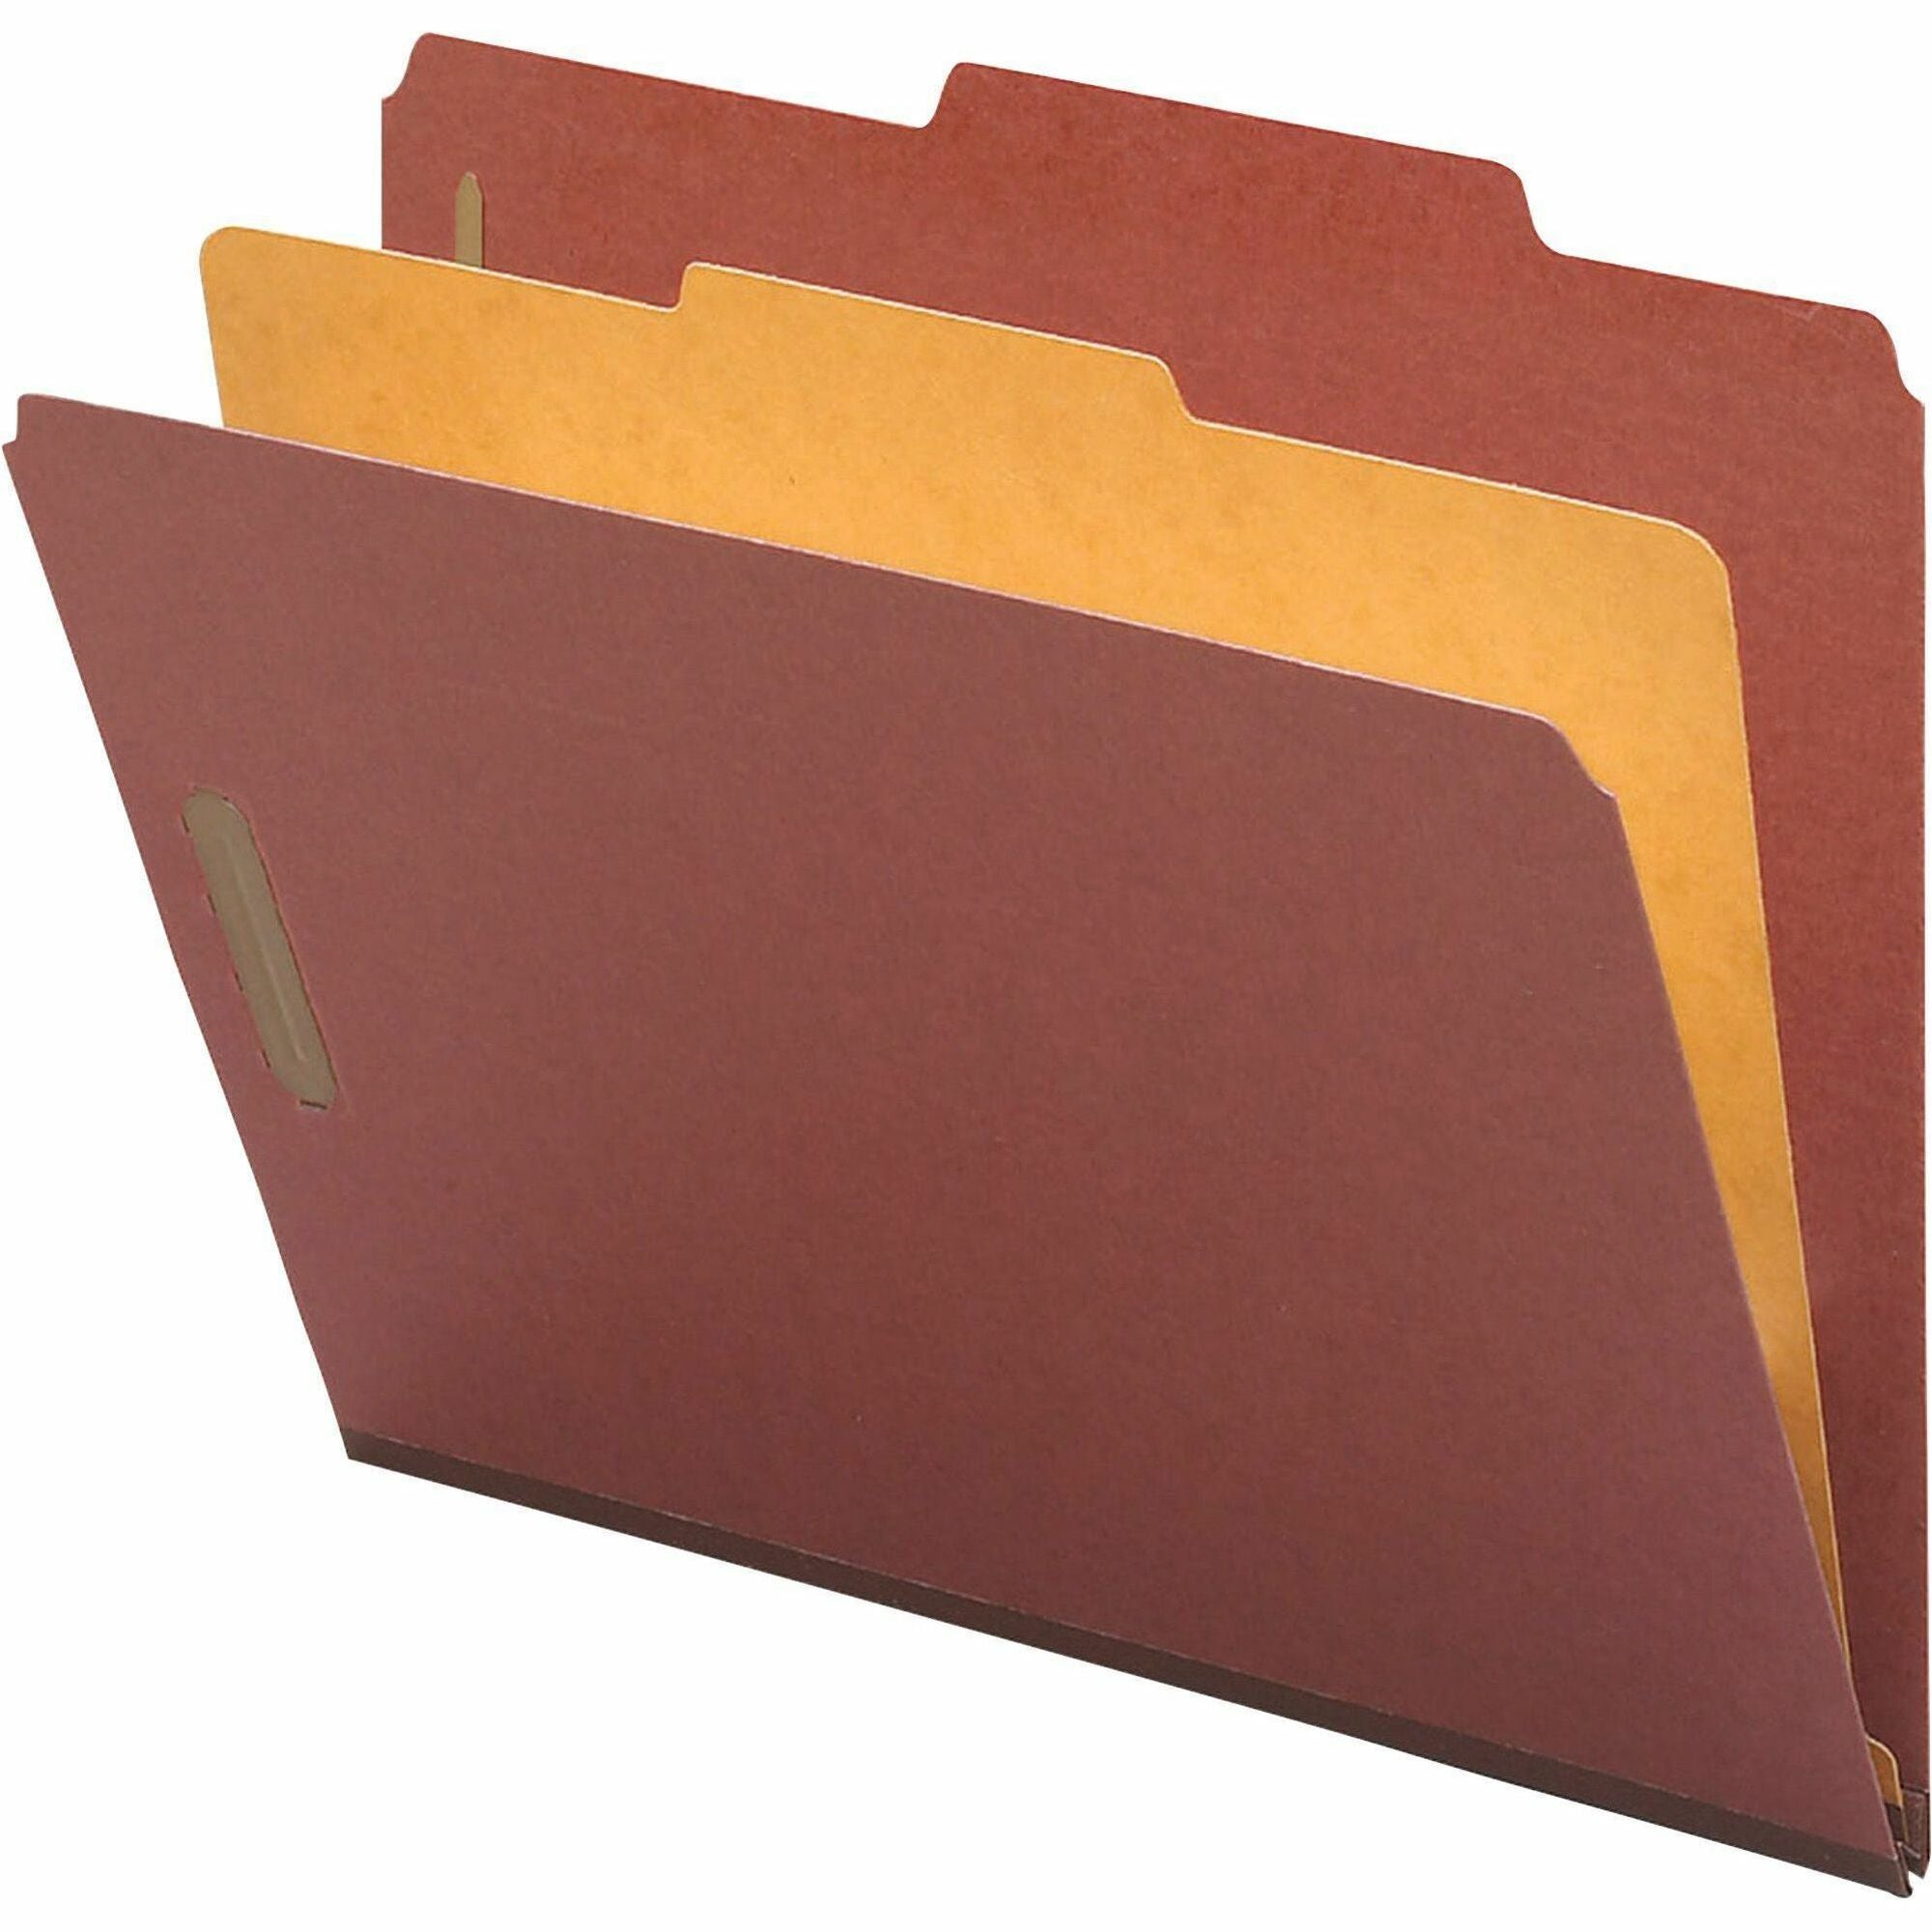 Nature Saver 2/5 Tab Cut Legal Recycled Classification Folder - 8 1/2" x 14" - 4 Fastener(s) - 2" Fastener Capacity for Folder, 1" Fastener Capacity for Divider - 1 Divider(s) - Pressboard - Red - 100% Recycled - 10 / Box - 